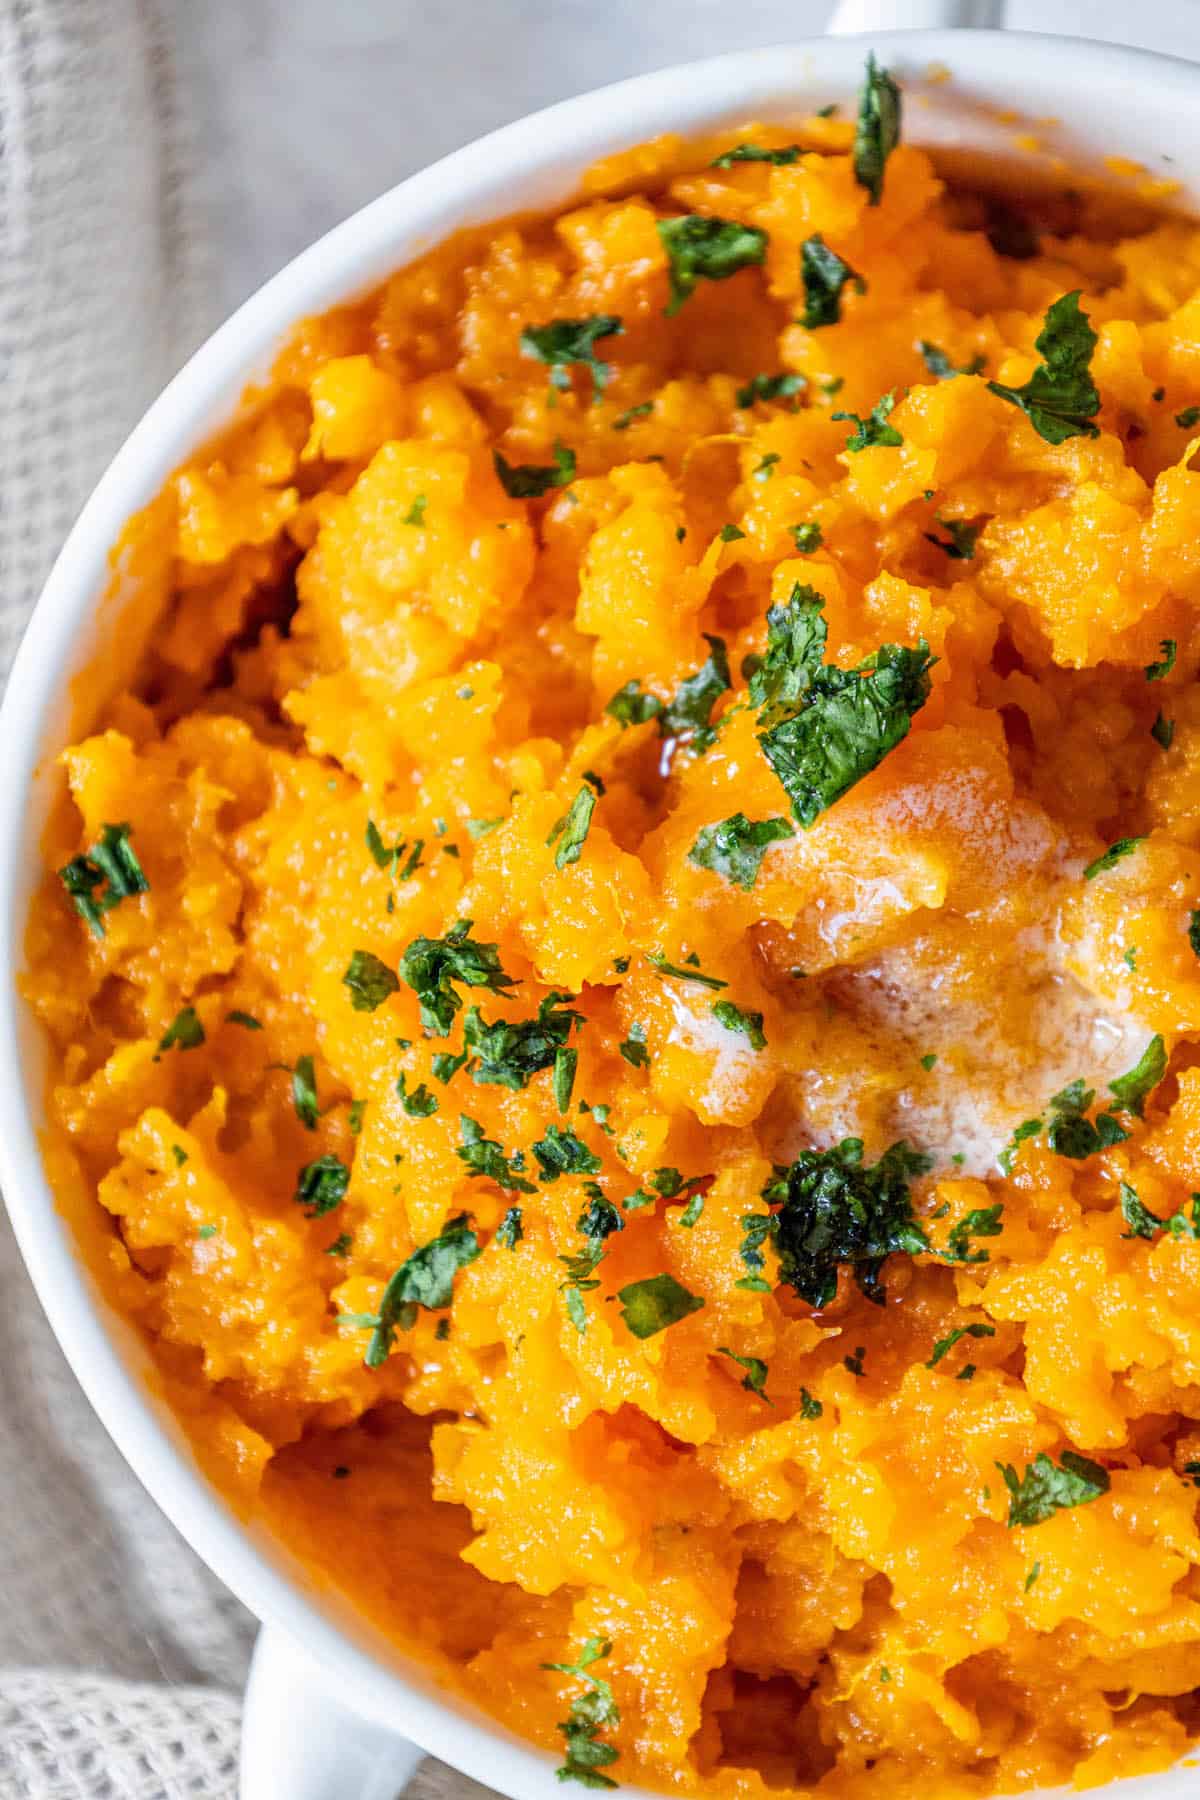 Mashed sweet potatoes with parsley.